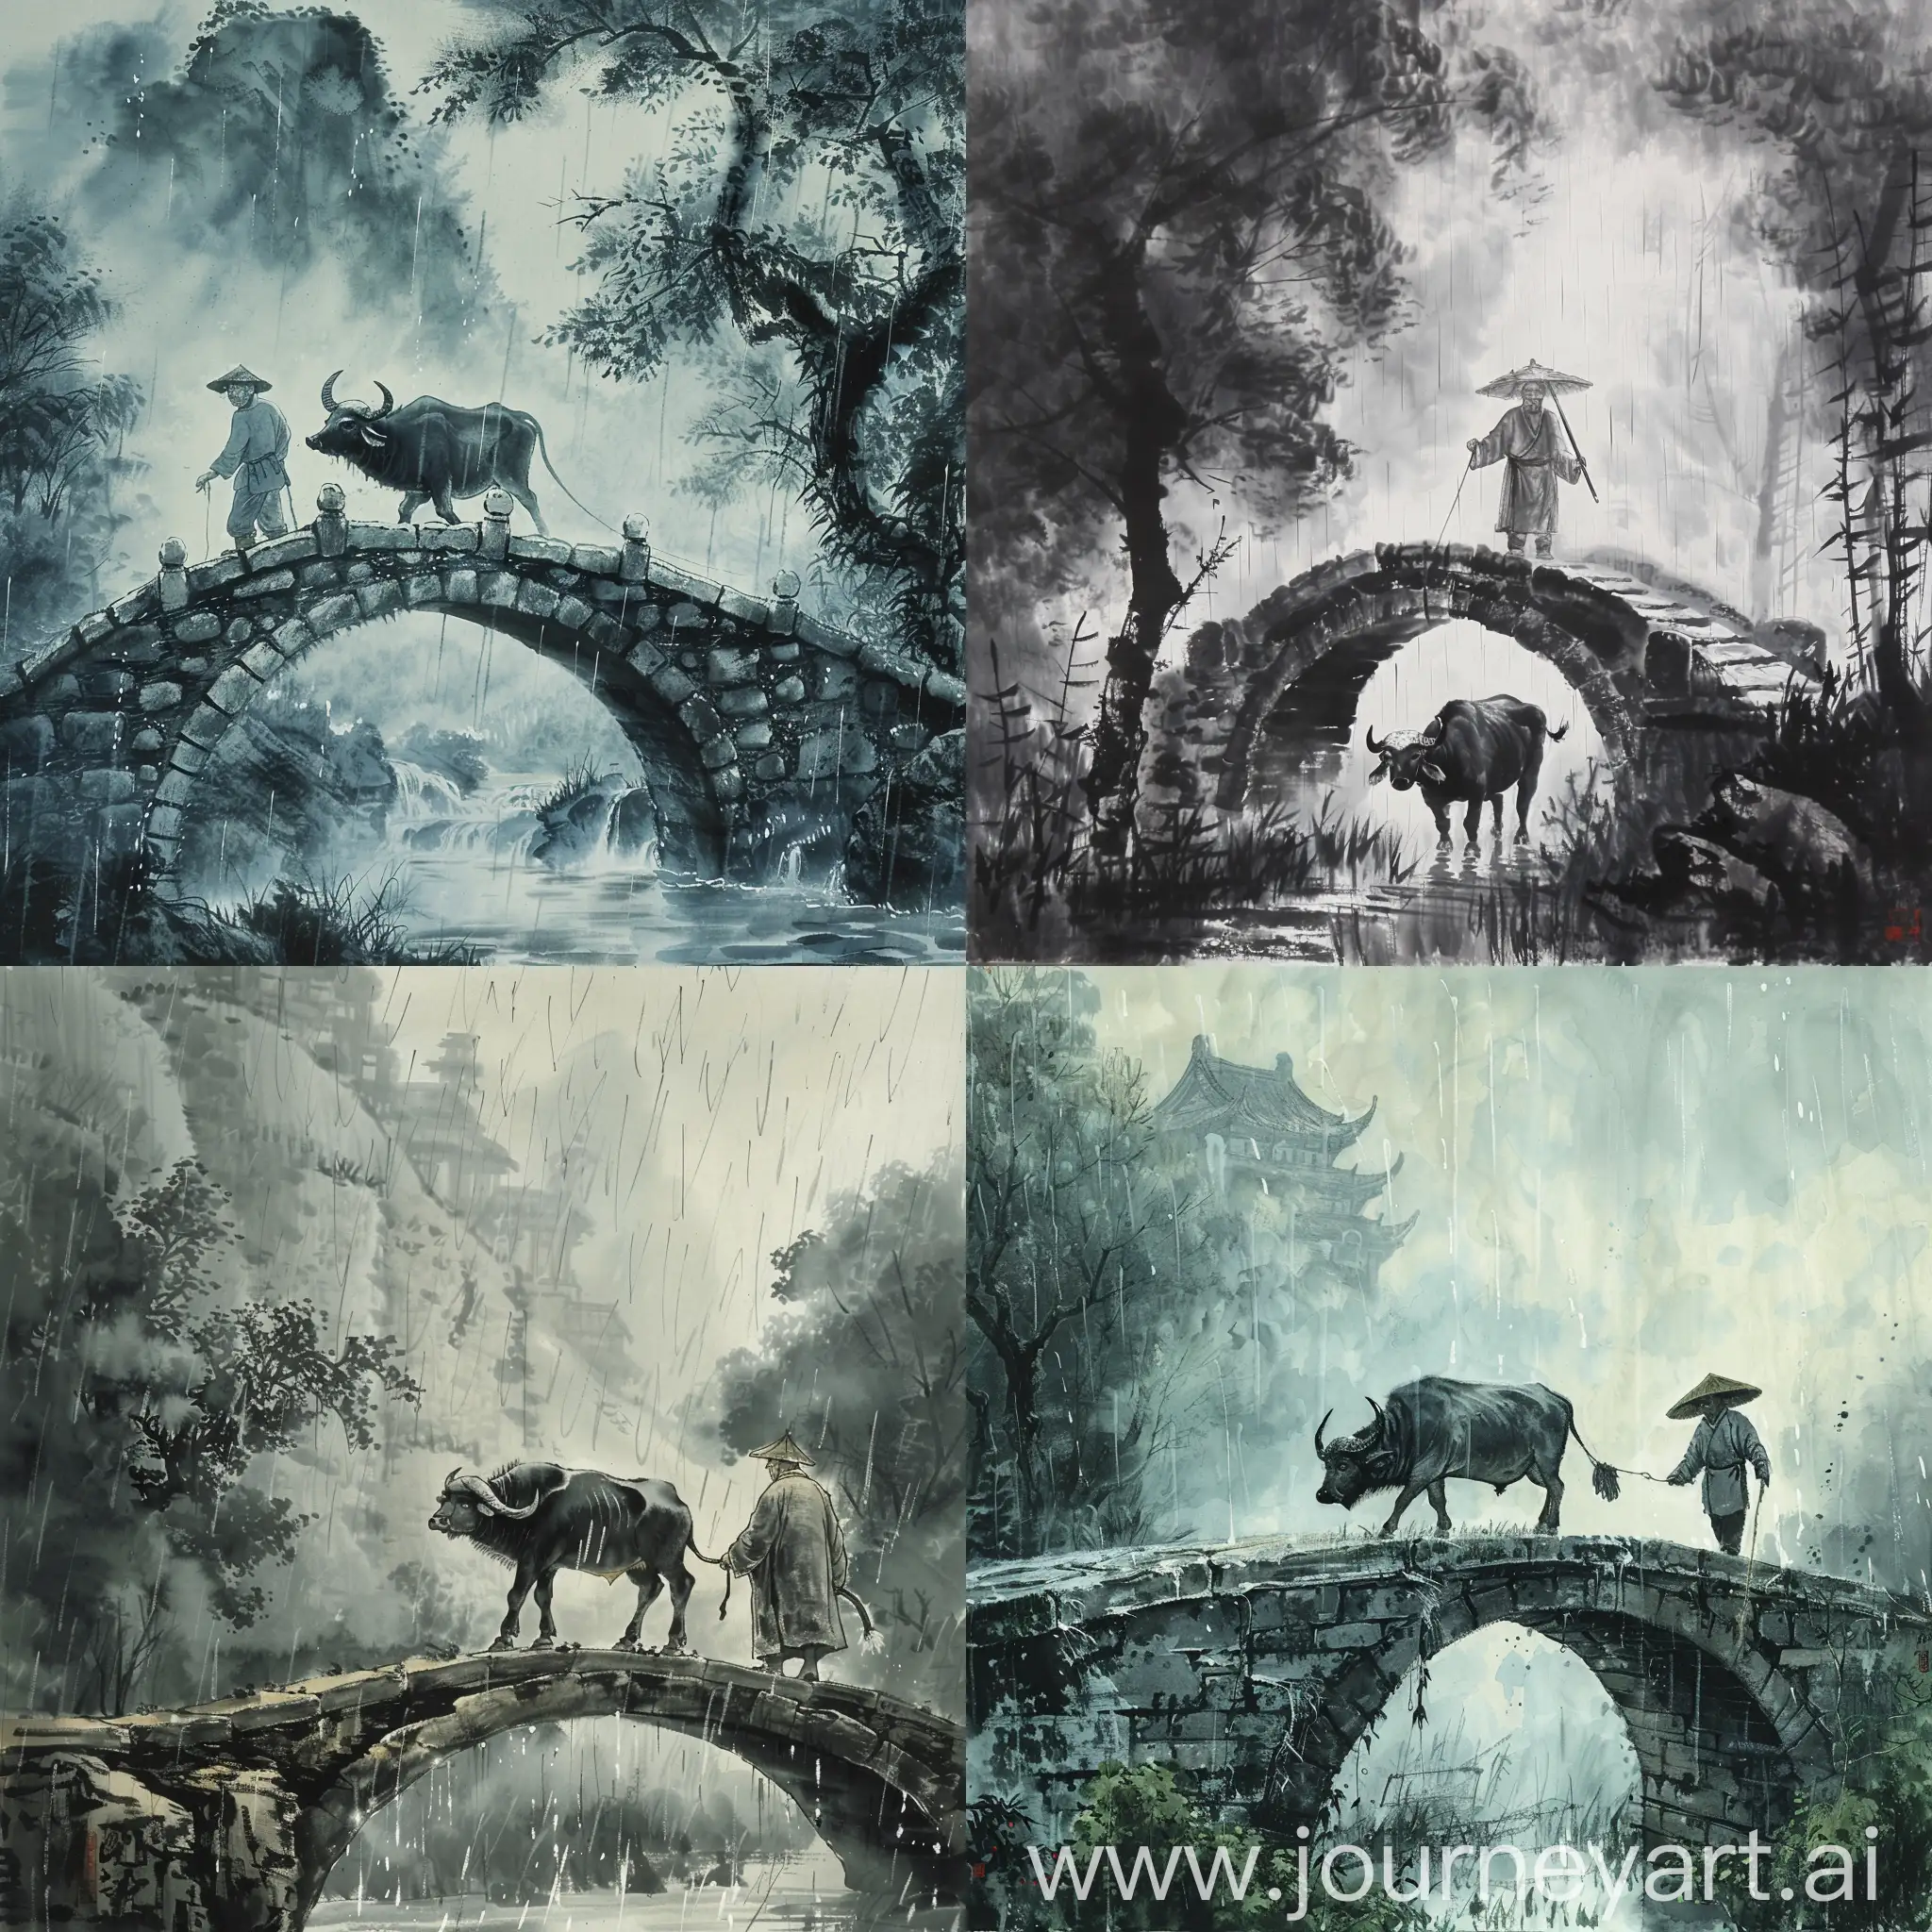 Traditional-Chinese-Ink-Painting-Old-Farmer-Leading-Water-Buffalo-Across-Ancient-Stone-Bridge-in-Misty-Rain